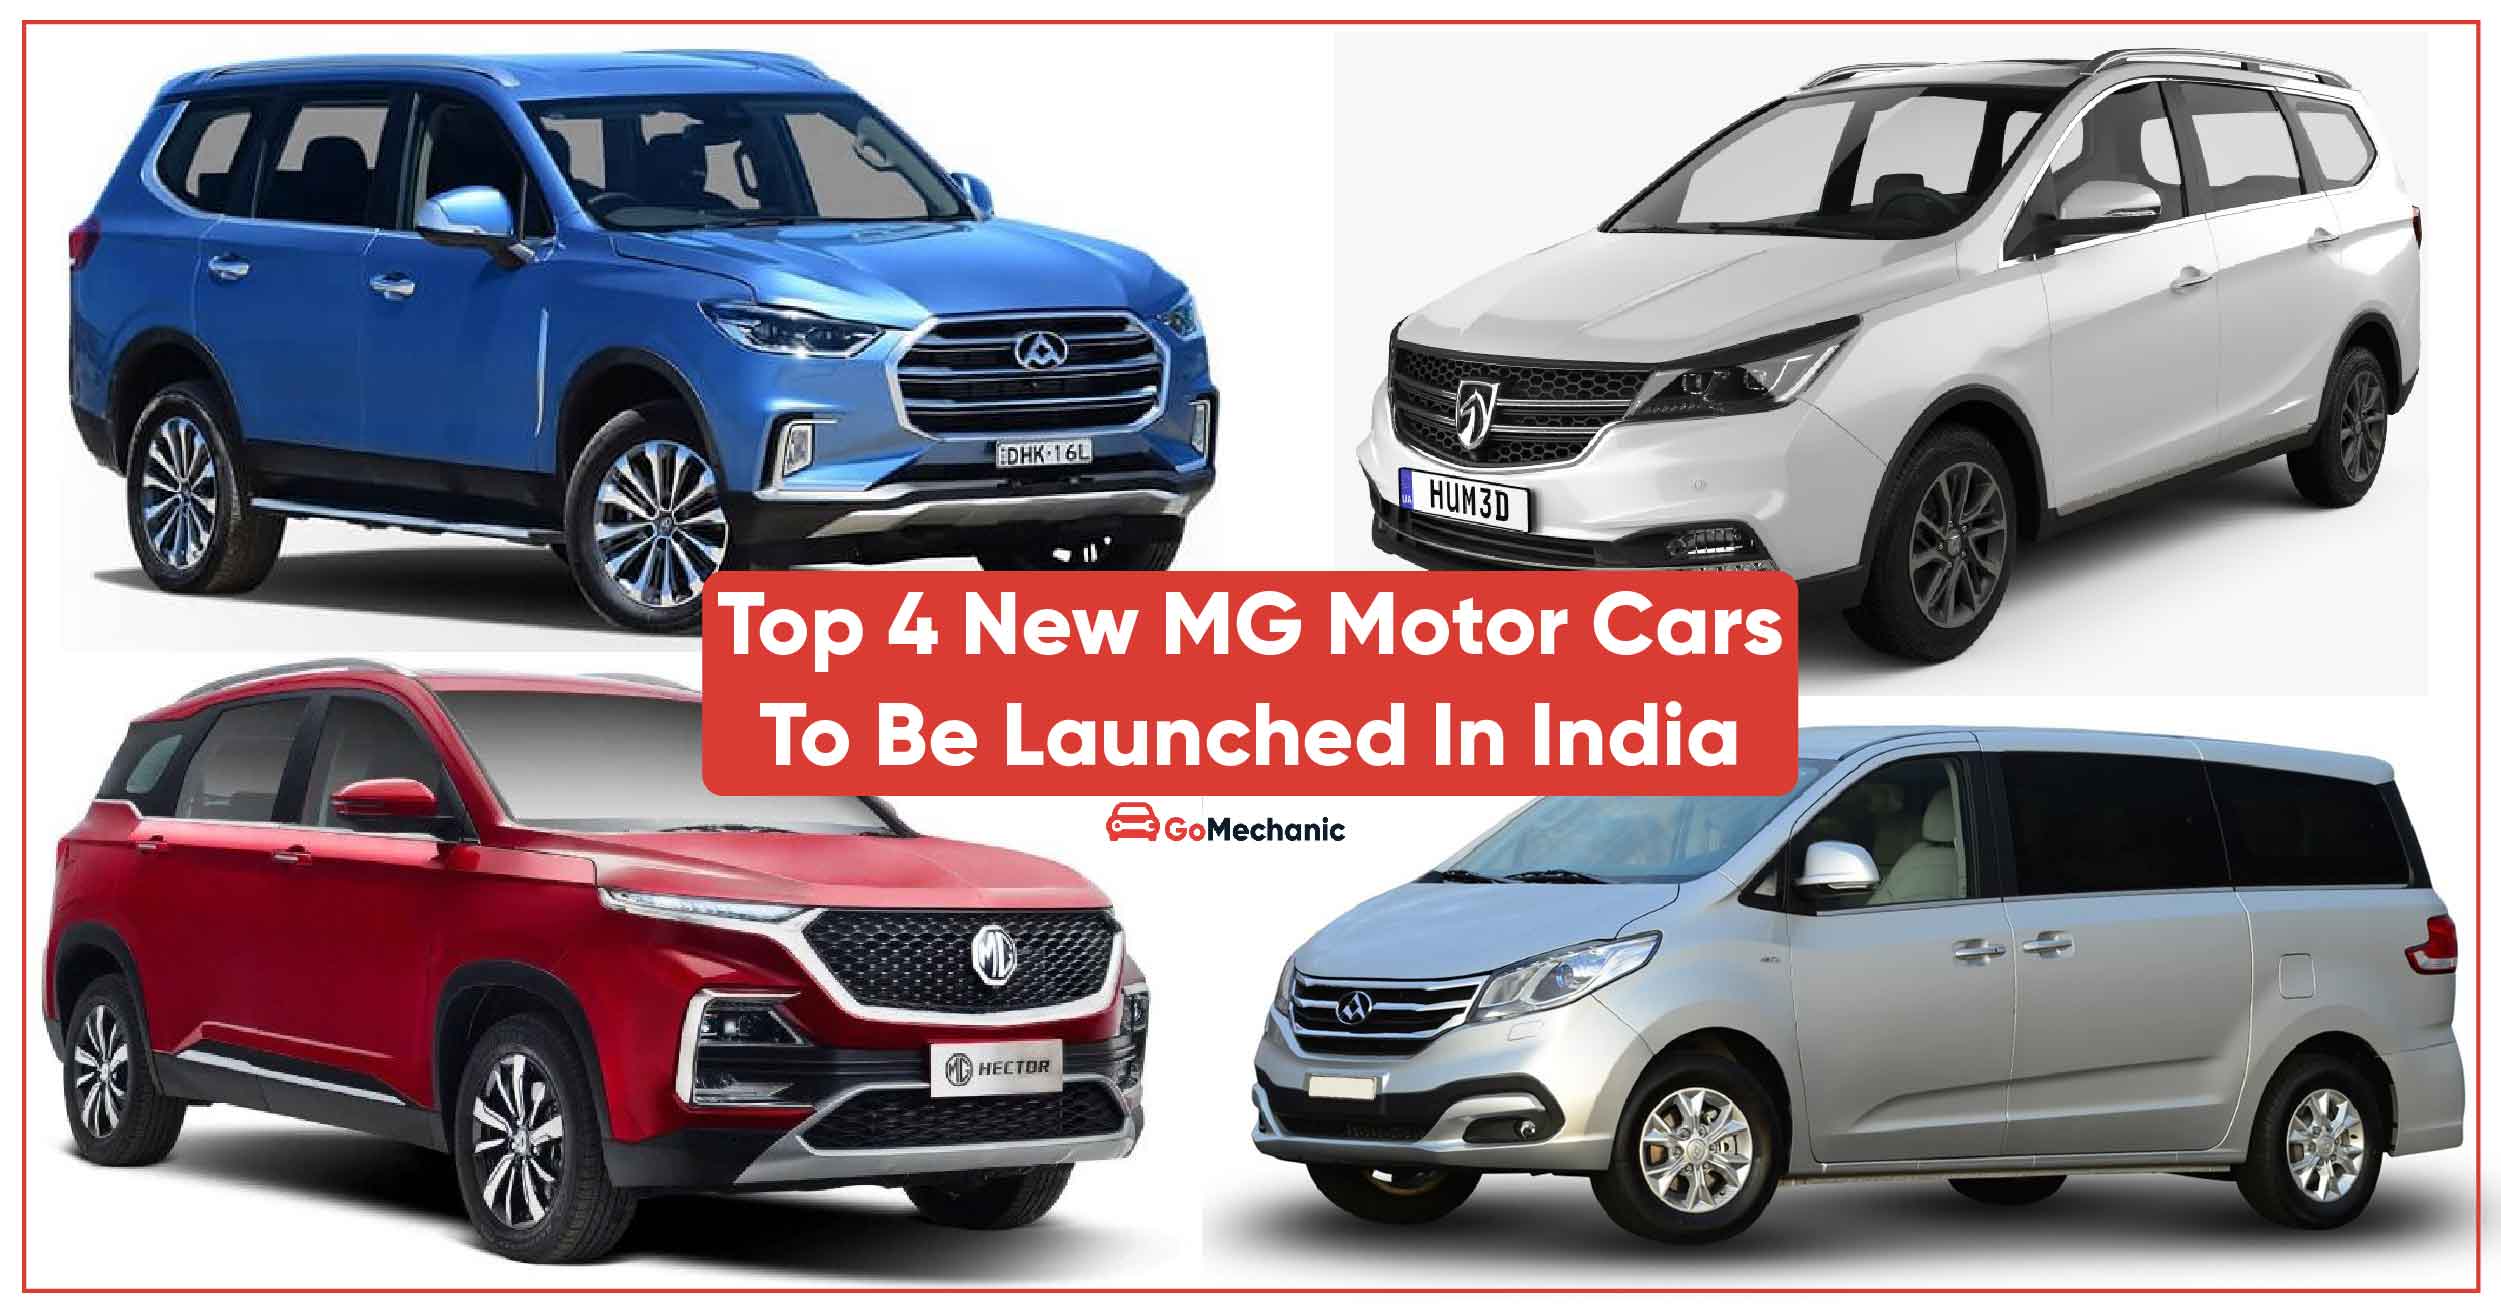 Top 4 New MG Motor Cars To Be Launched In India